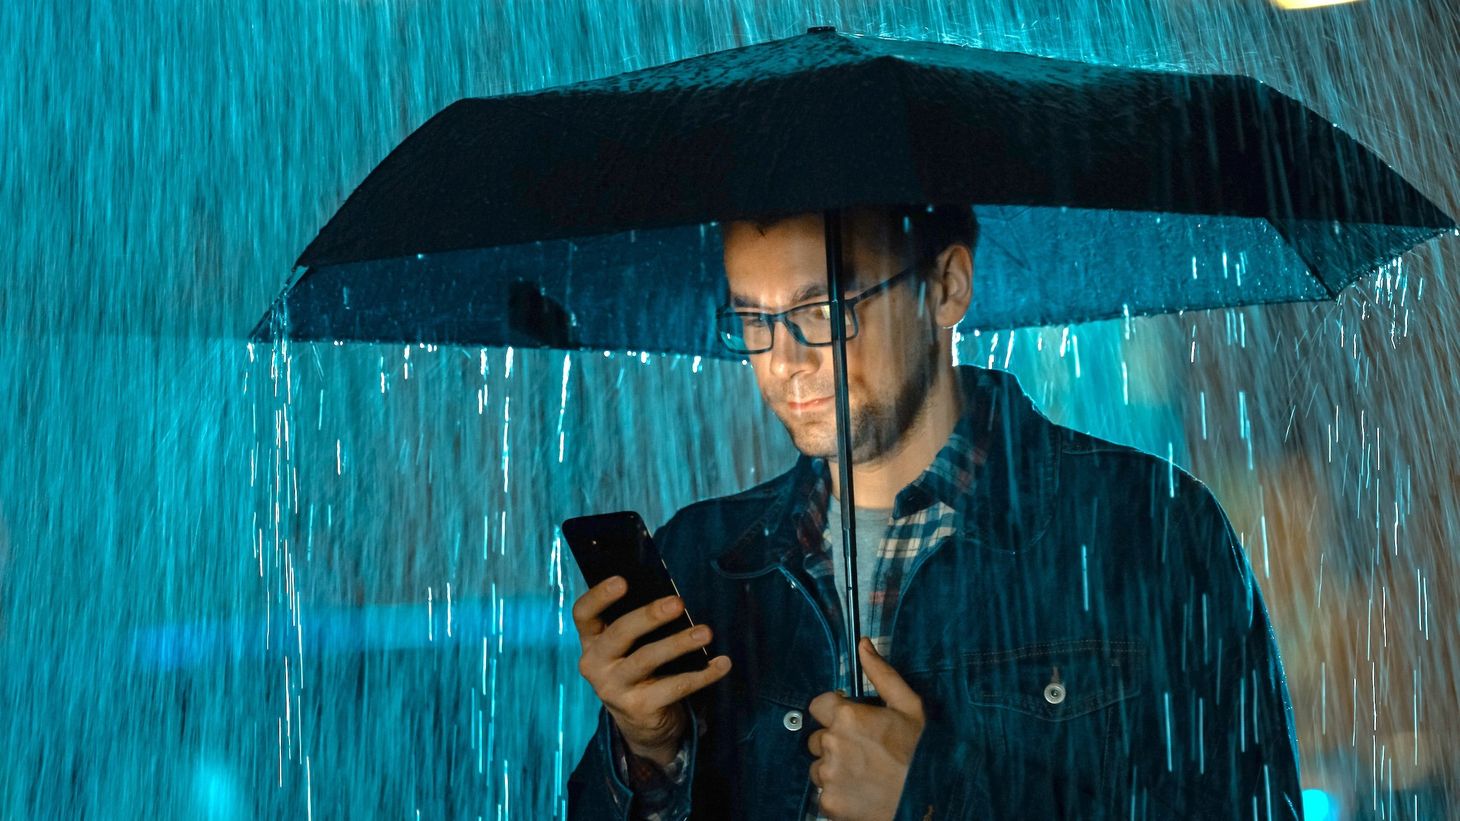 How rain, wind, heat and other weather can impact on your internet